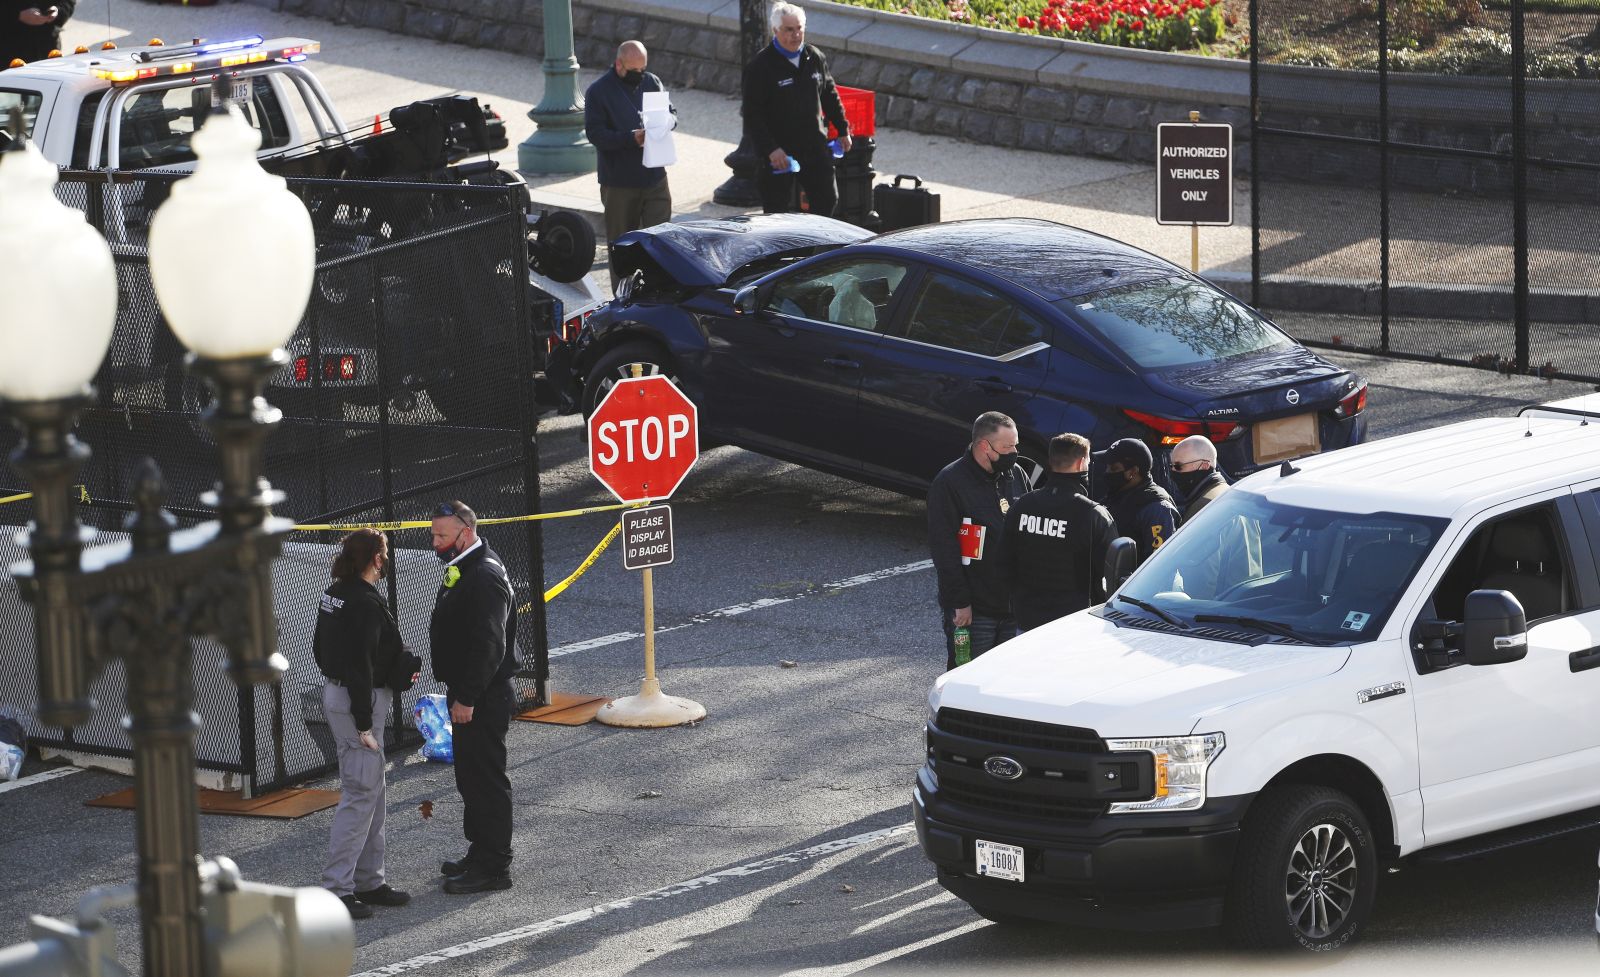 epa09112604 Officials tow the vehicle from the scene after it rammed a barricade outside the US Capitol in Washington, DC, USA, 02 April 2021. According to US Capitol Police one police officer was killed and another injured after a vehicle rammed into the North Barricade at the US Capitol. A man was shot after exiting the vehicle wielding a knife, he later succumbed to his injuries.  EPA/SHAWN THEW